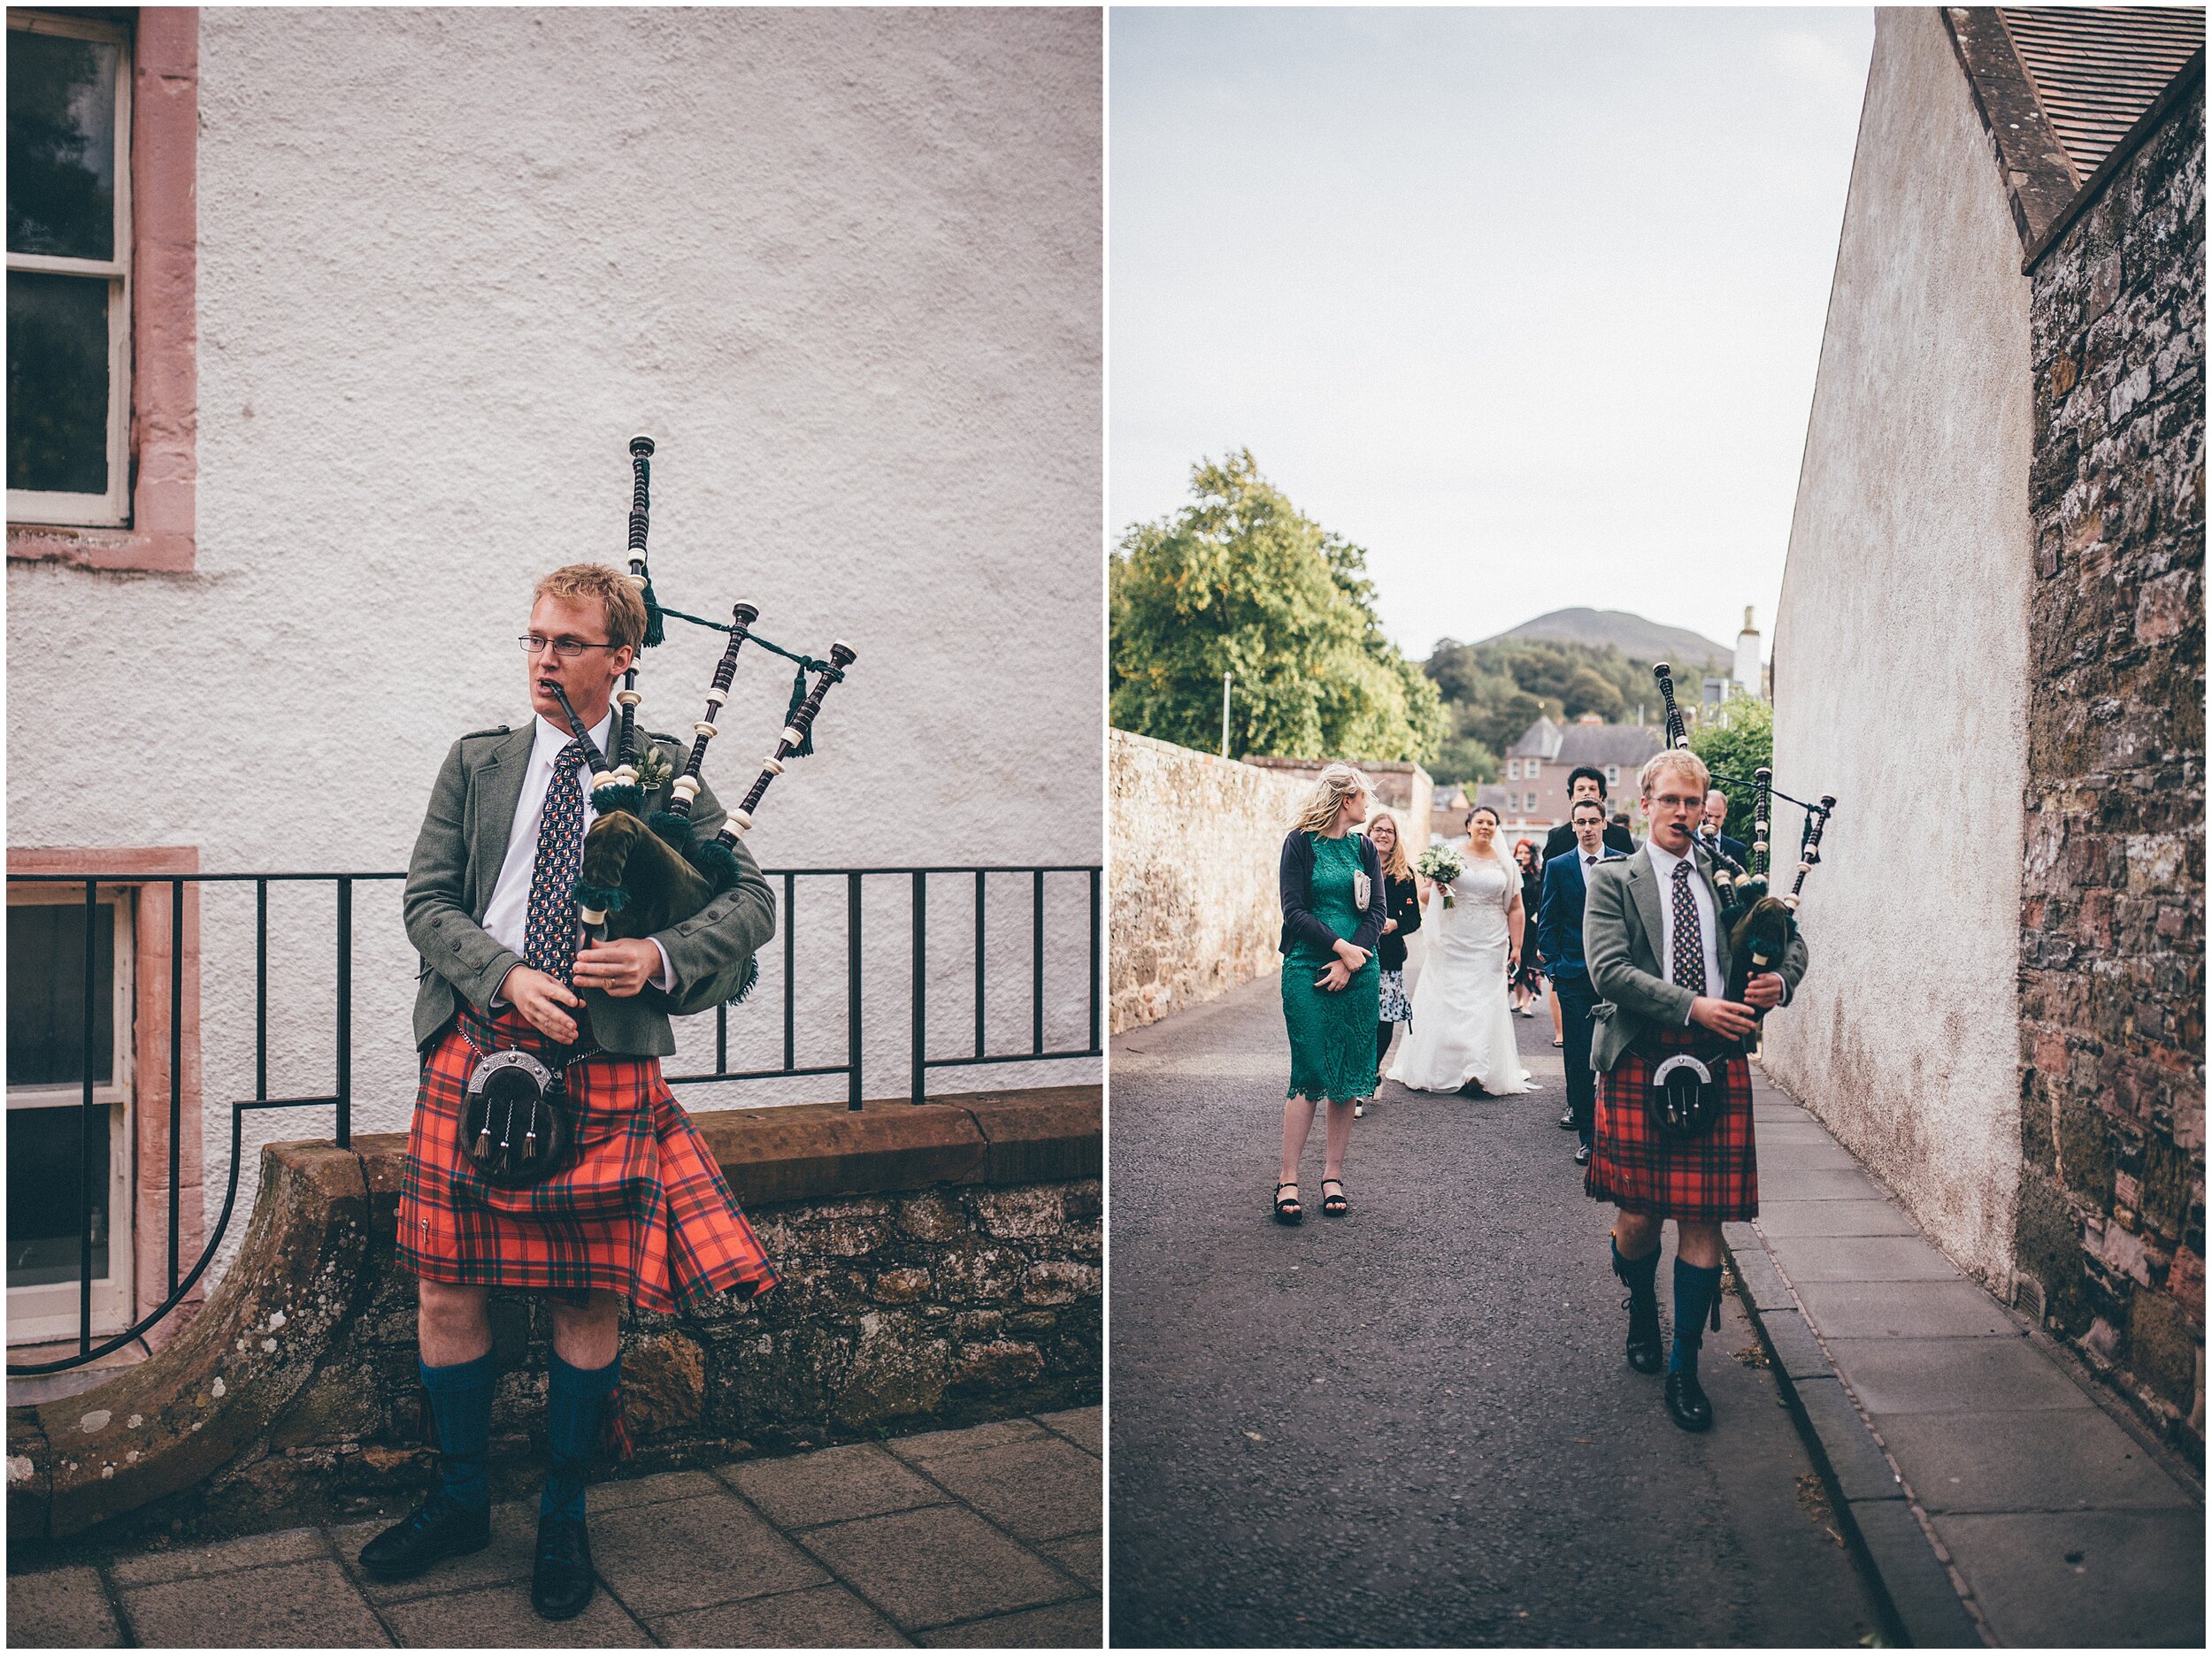 Bagpipe player at a wedding in Melrose Abbey on Scottish Borders.